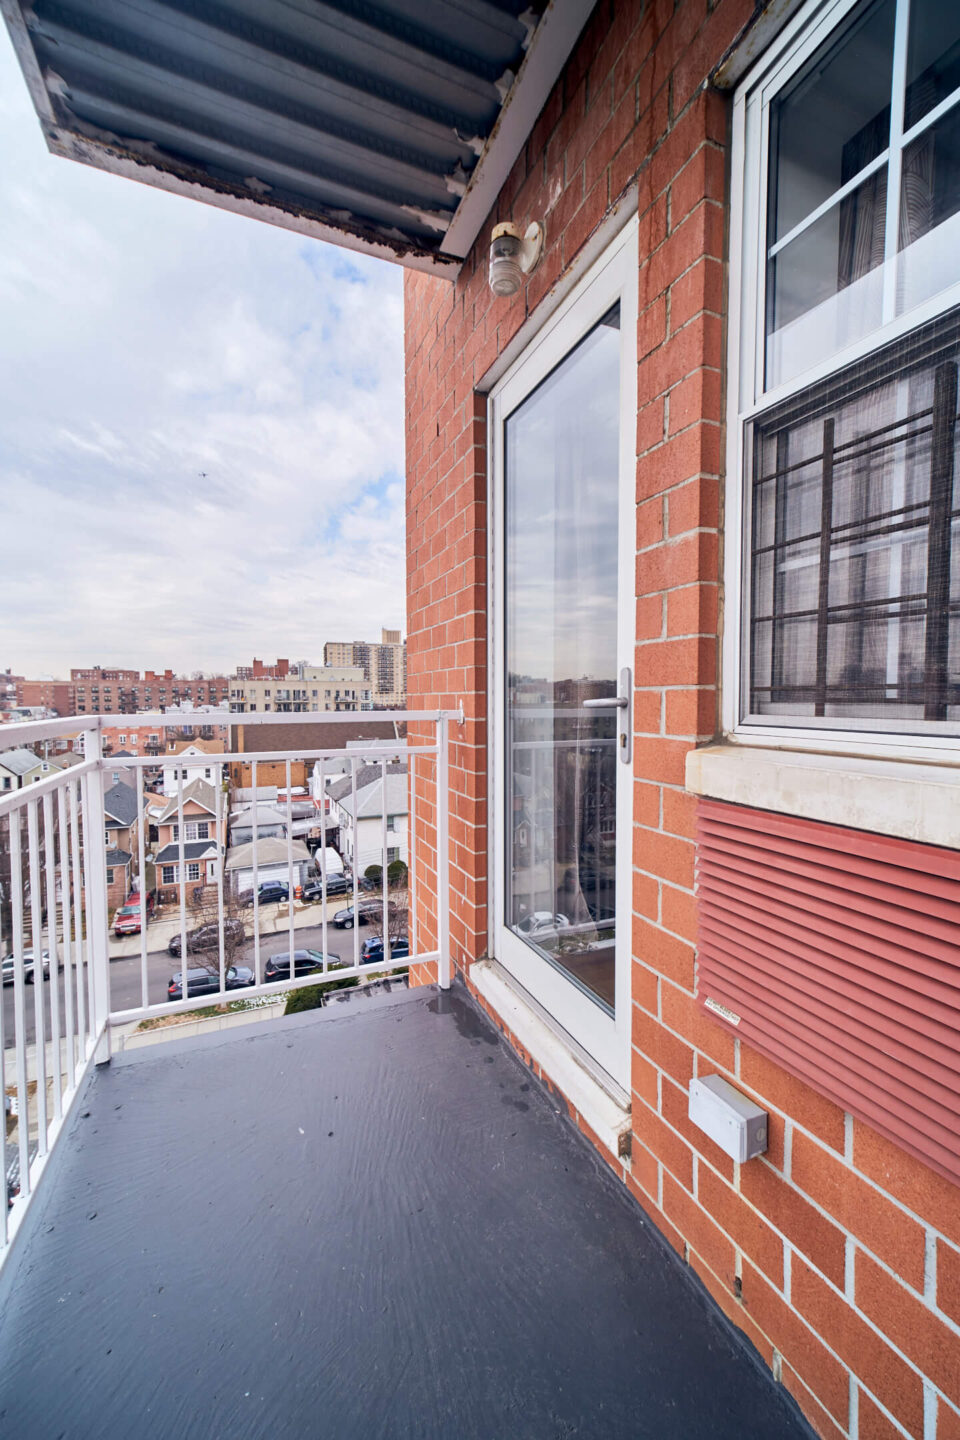 91-12 175TH St, JAMAICA, NY 11432 - Real Estate Photography - AirBnB Photography  